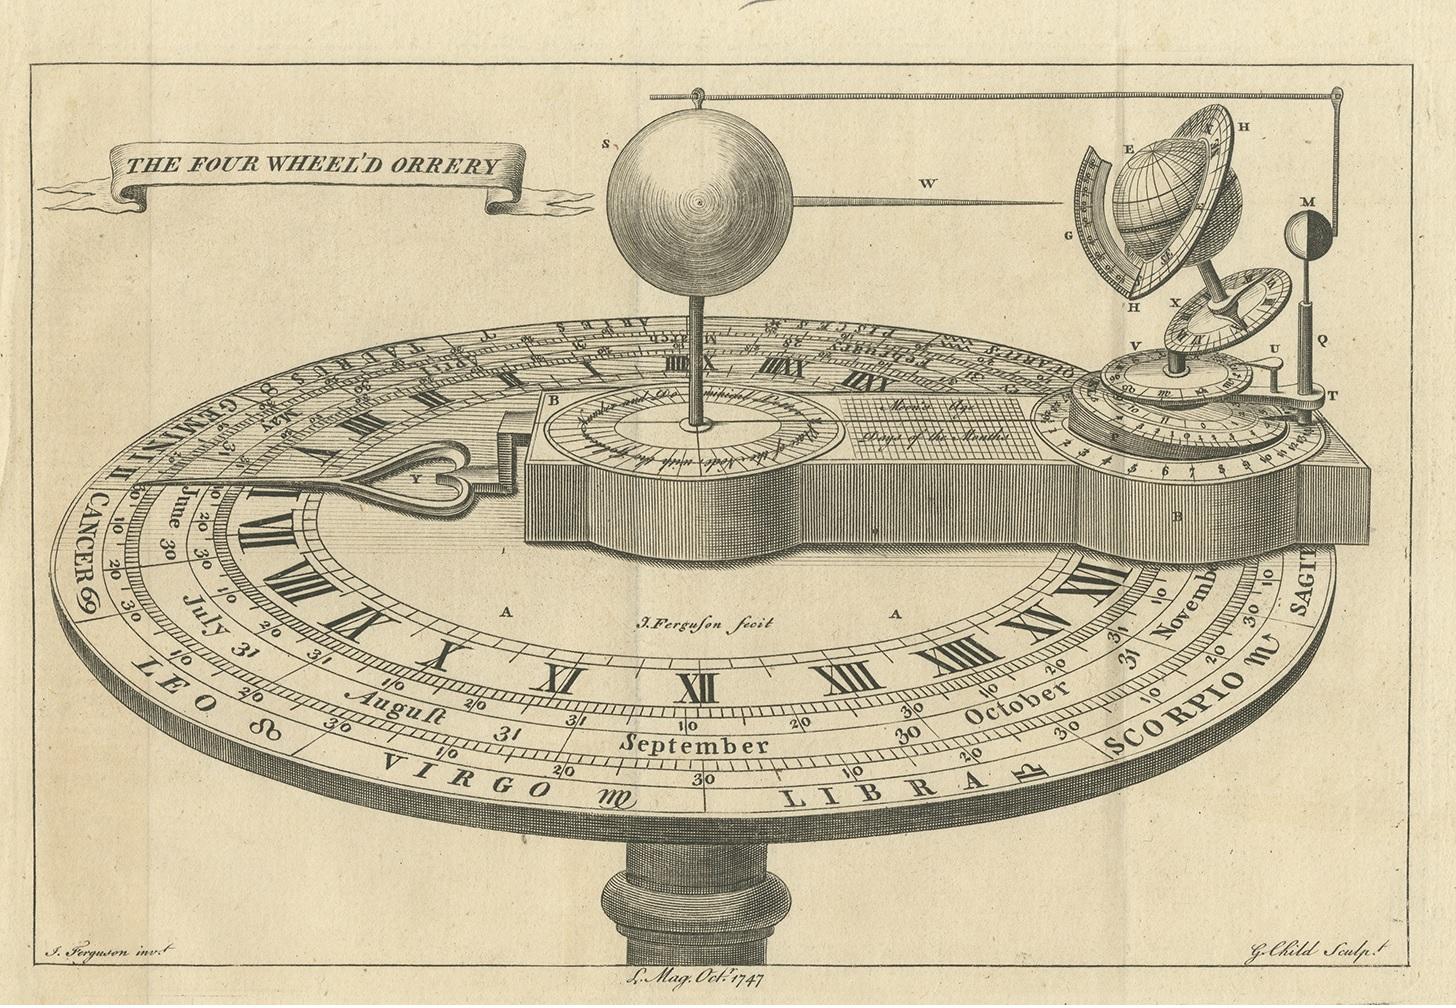 Antique print titled 'The Four Wheel'd Orrery'. Copper engraving of an orrery. An orrery is a mechanical model of the Solar System that illustrates or predicts the relative positions and motions of the planets and moons, usually according to the